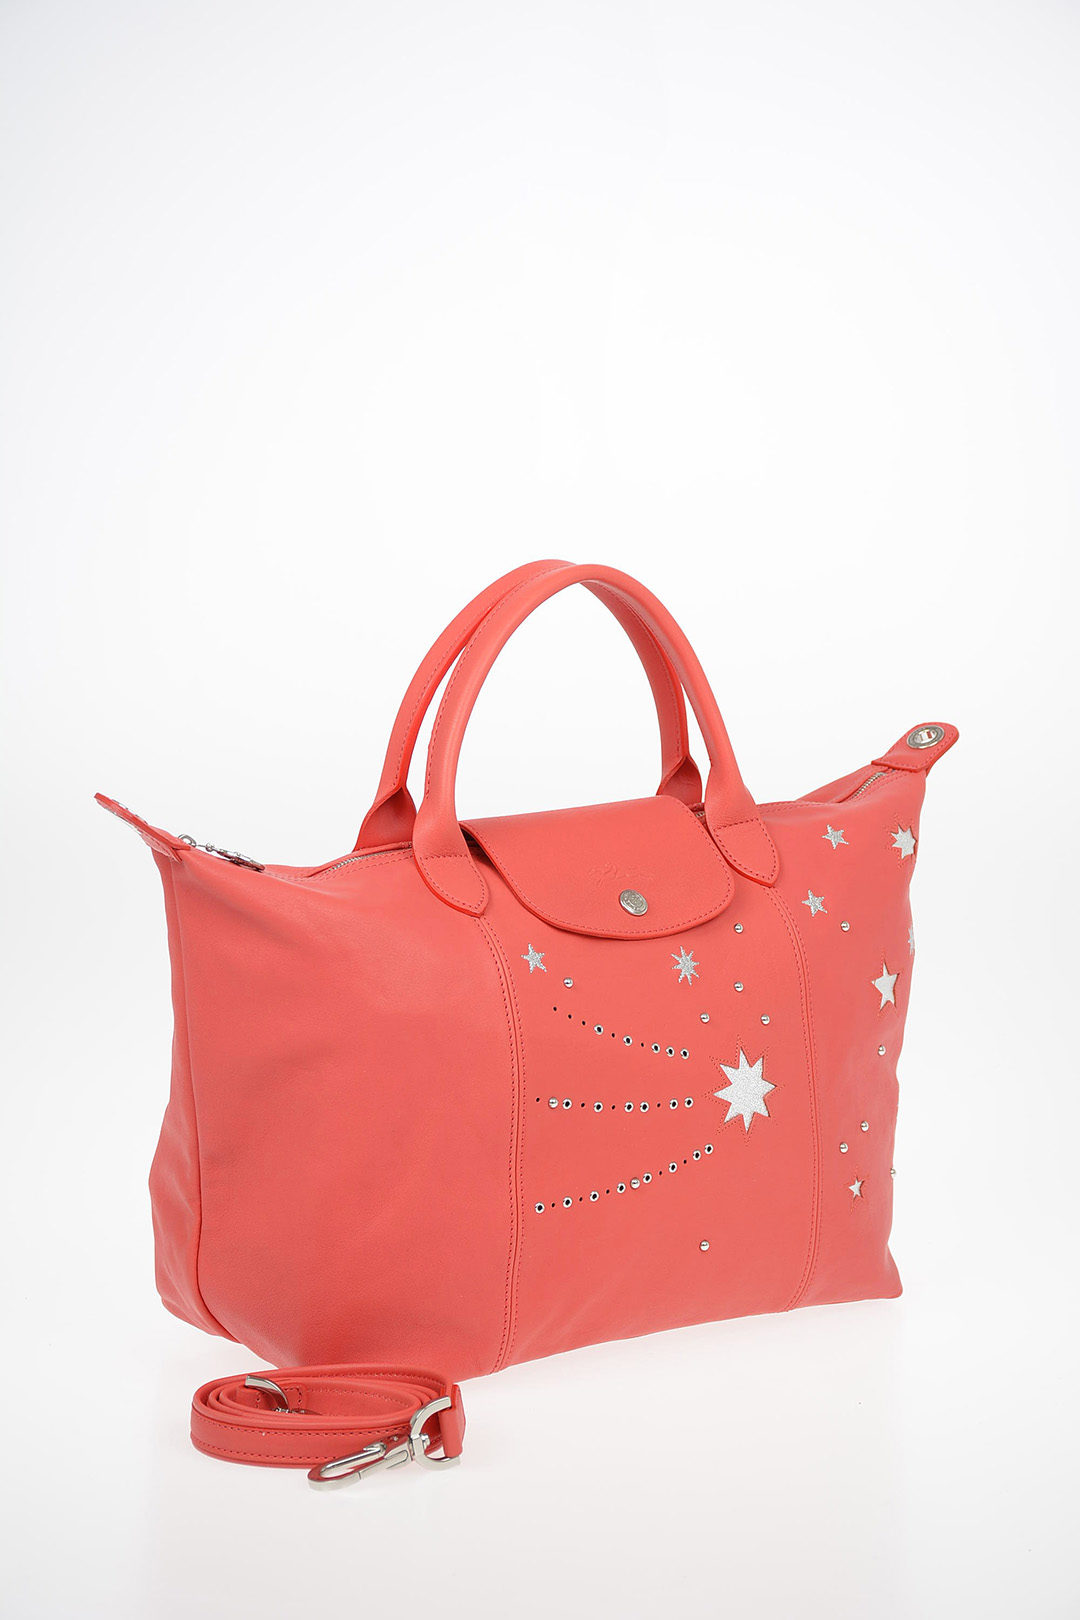 longchamp patterned tote